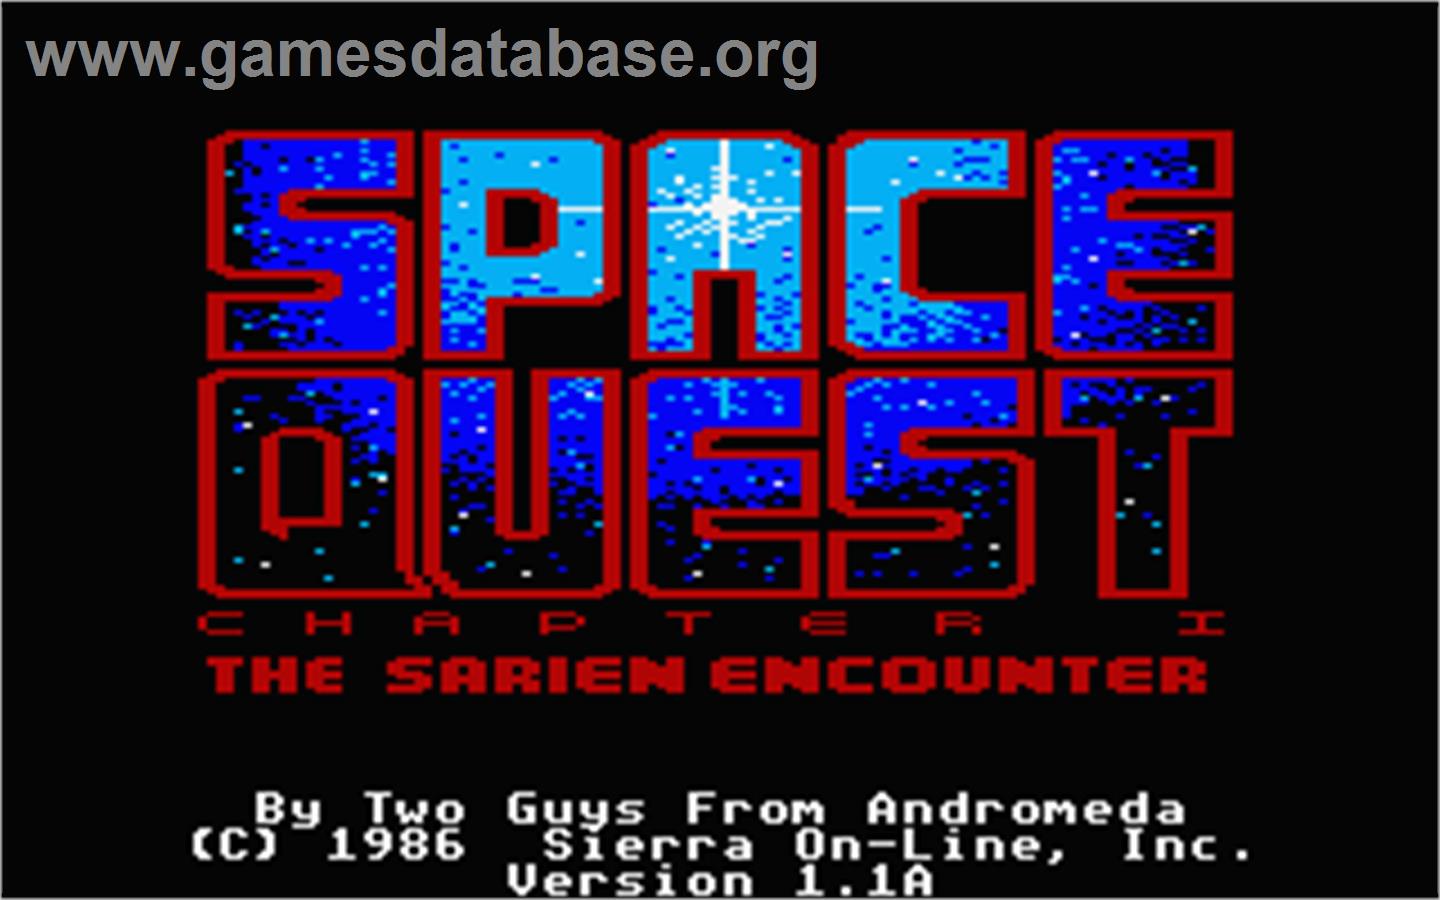 Space Quest I: Roger Wilco in the Sarien Encounter - Atari ST - Artwork - In Game